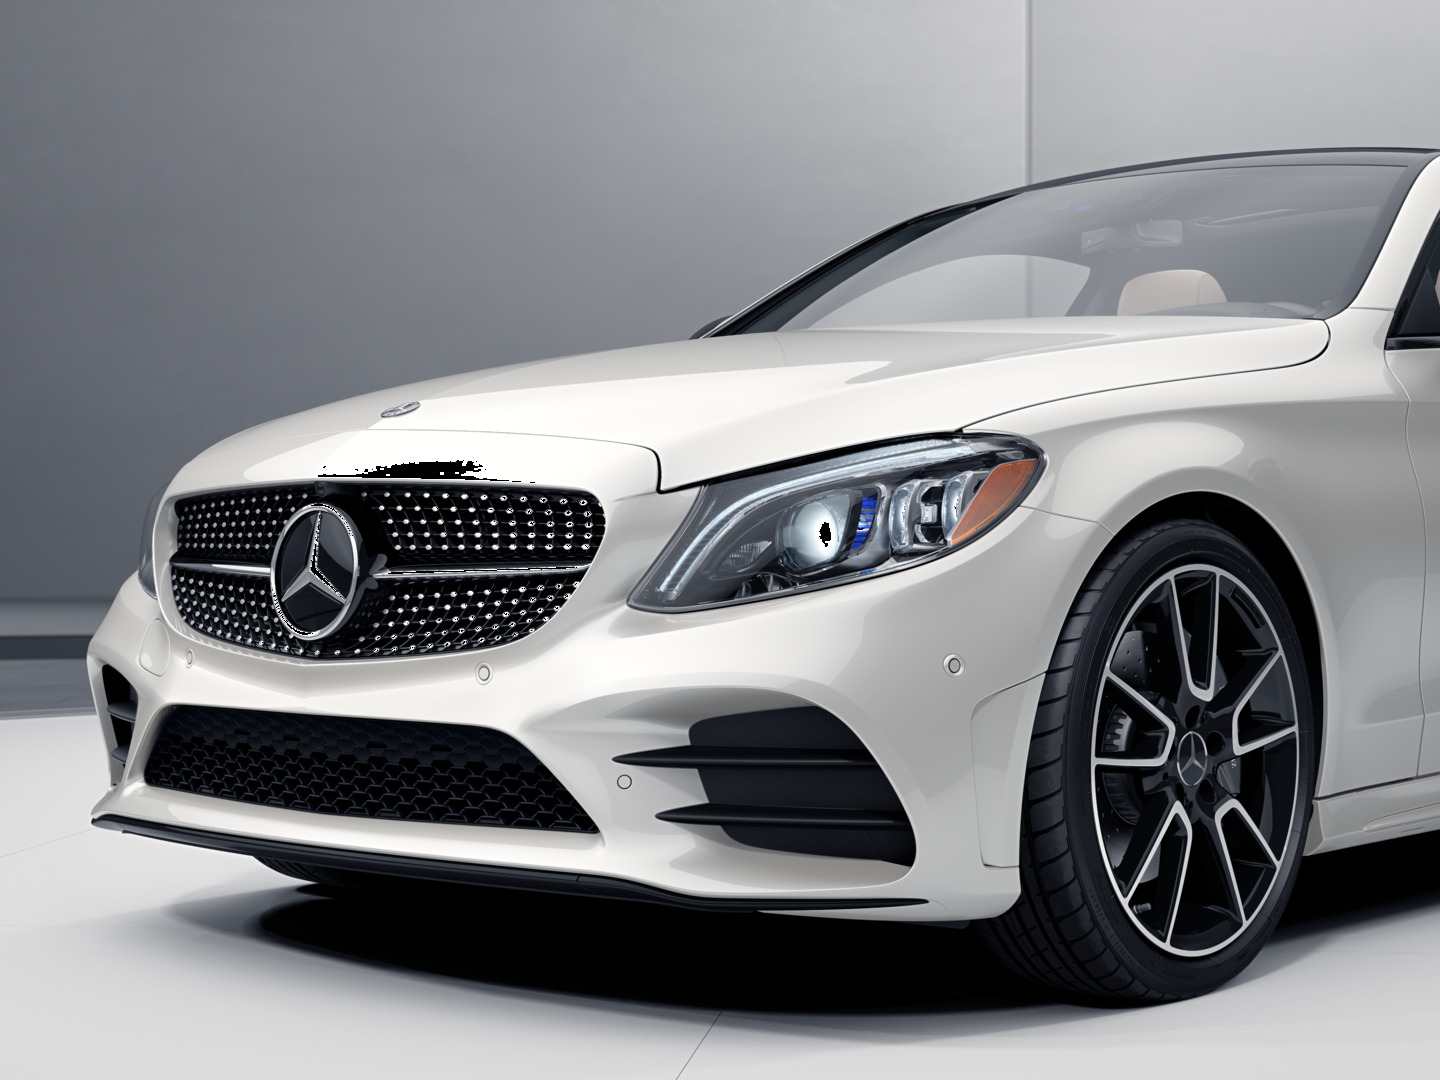 Mercedes-Benz Repair and Maintenance in Palm Springs, CA